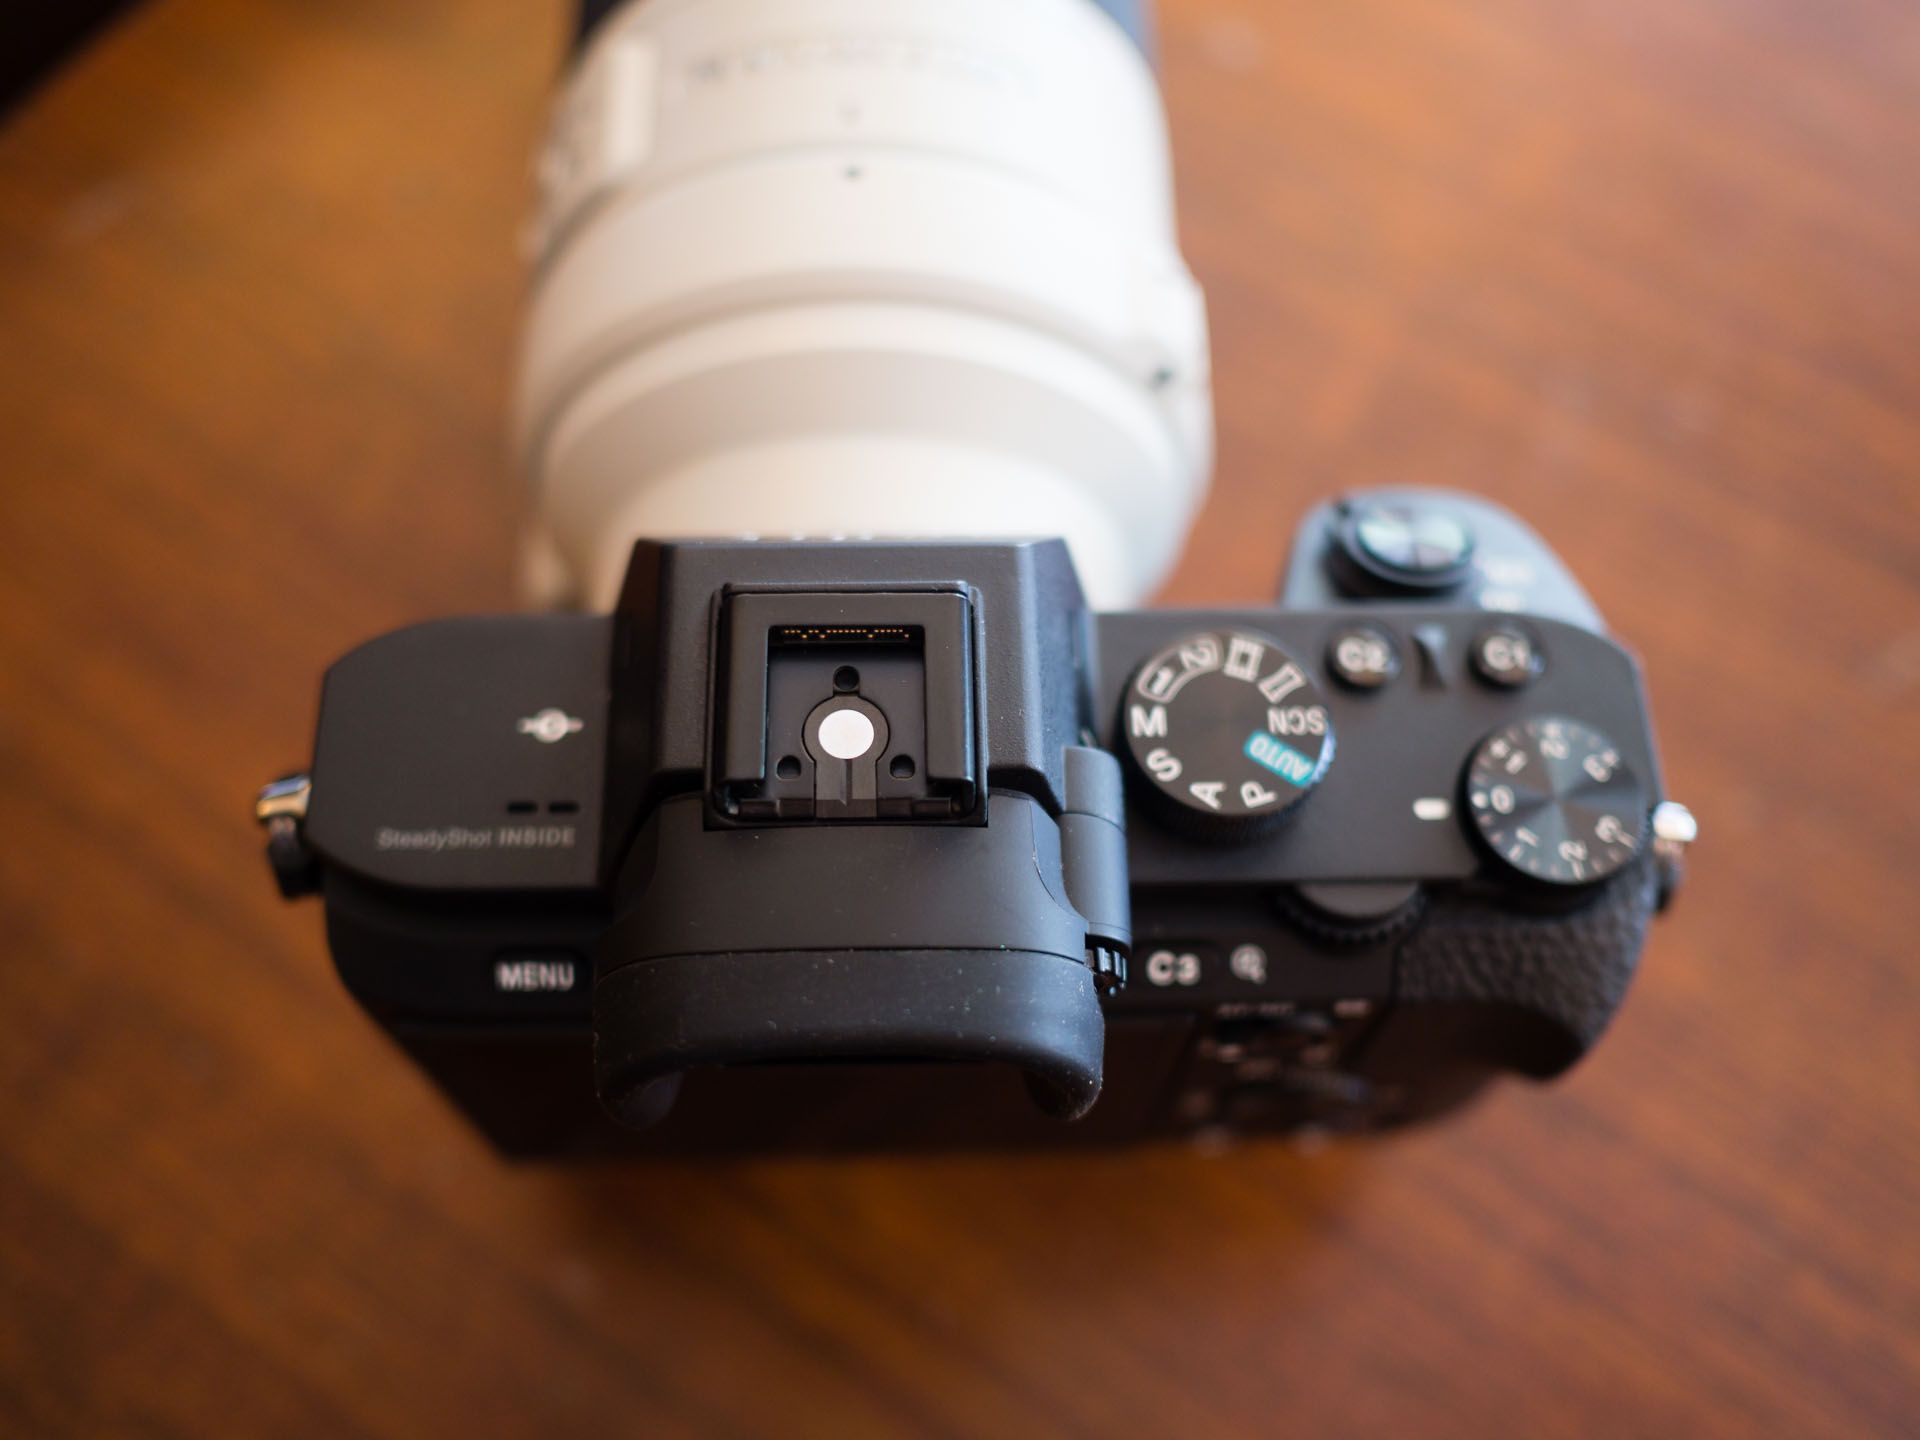 The Sony Alpha α7 Mark II Camera Review